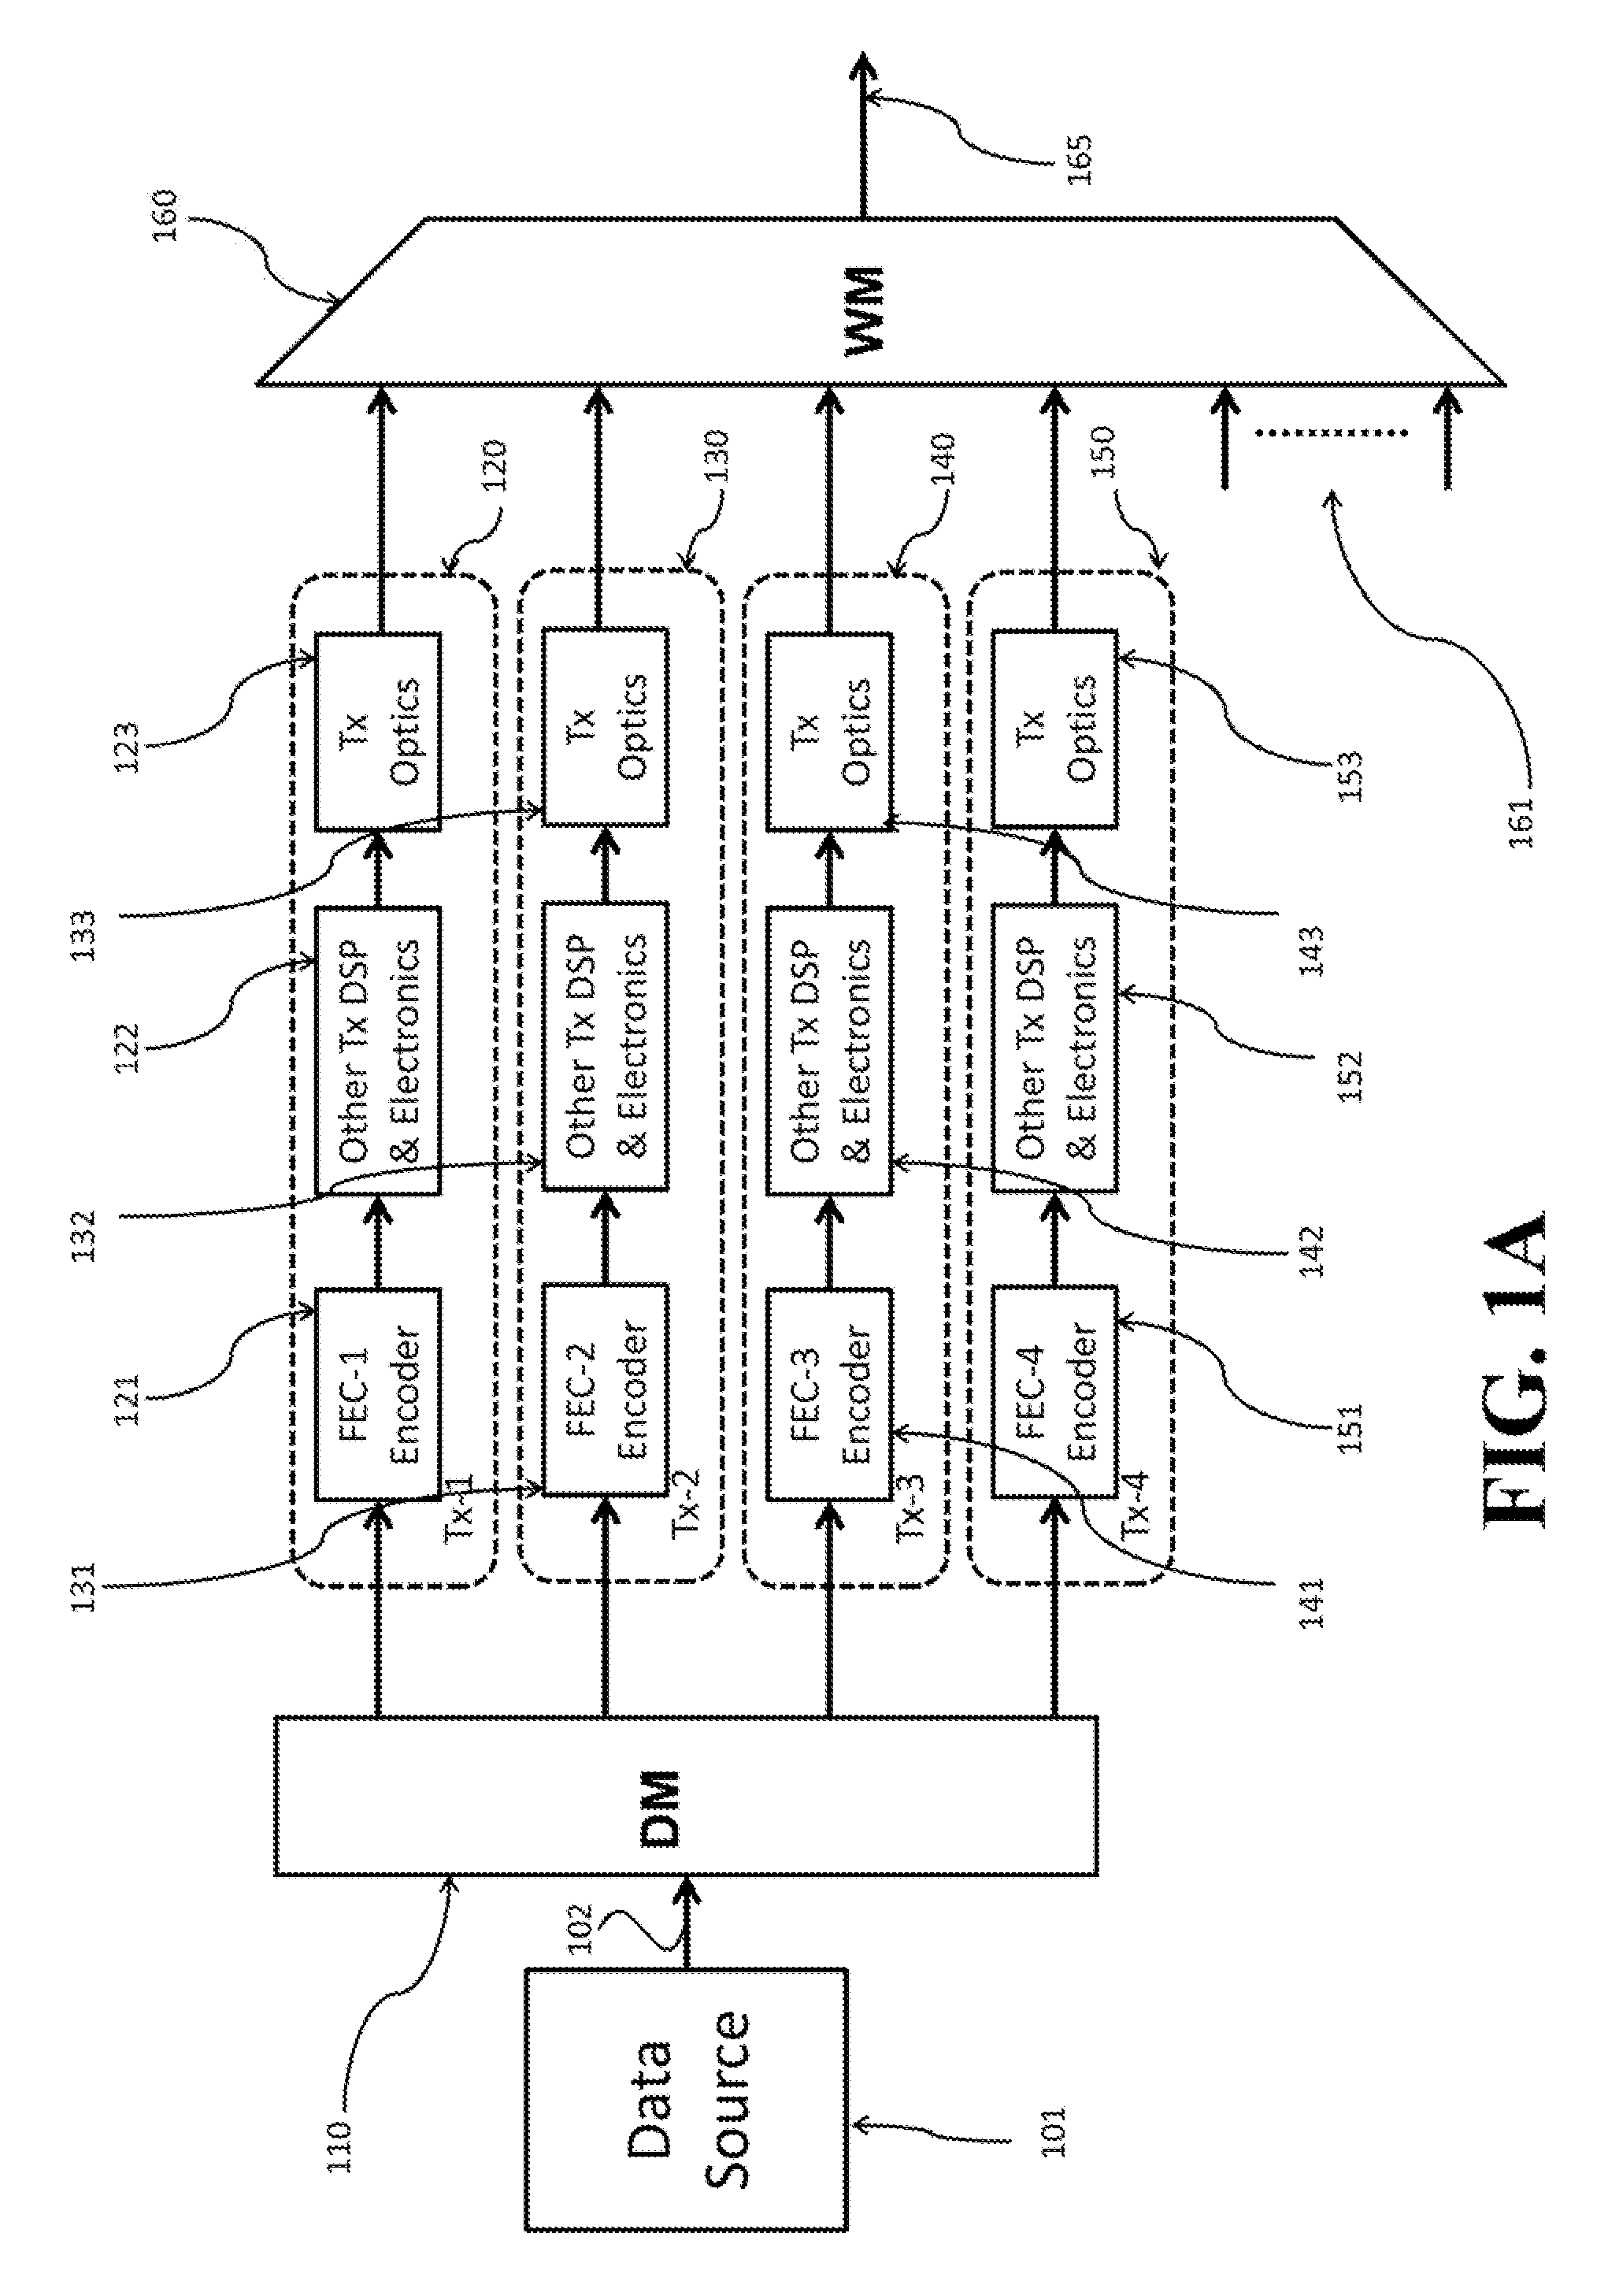 Adaptive error correction code for optical super-channels